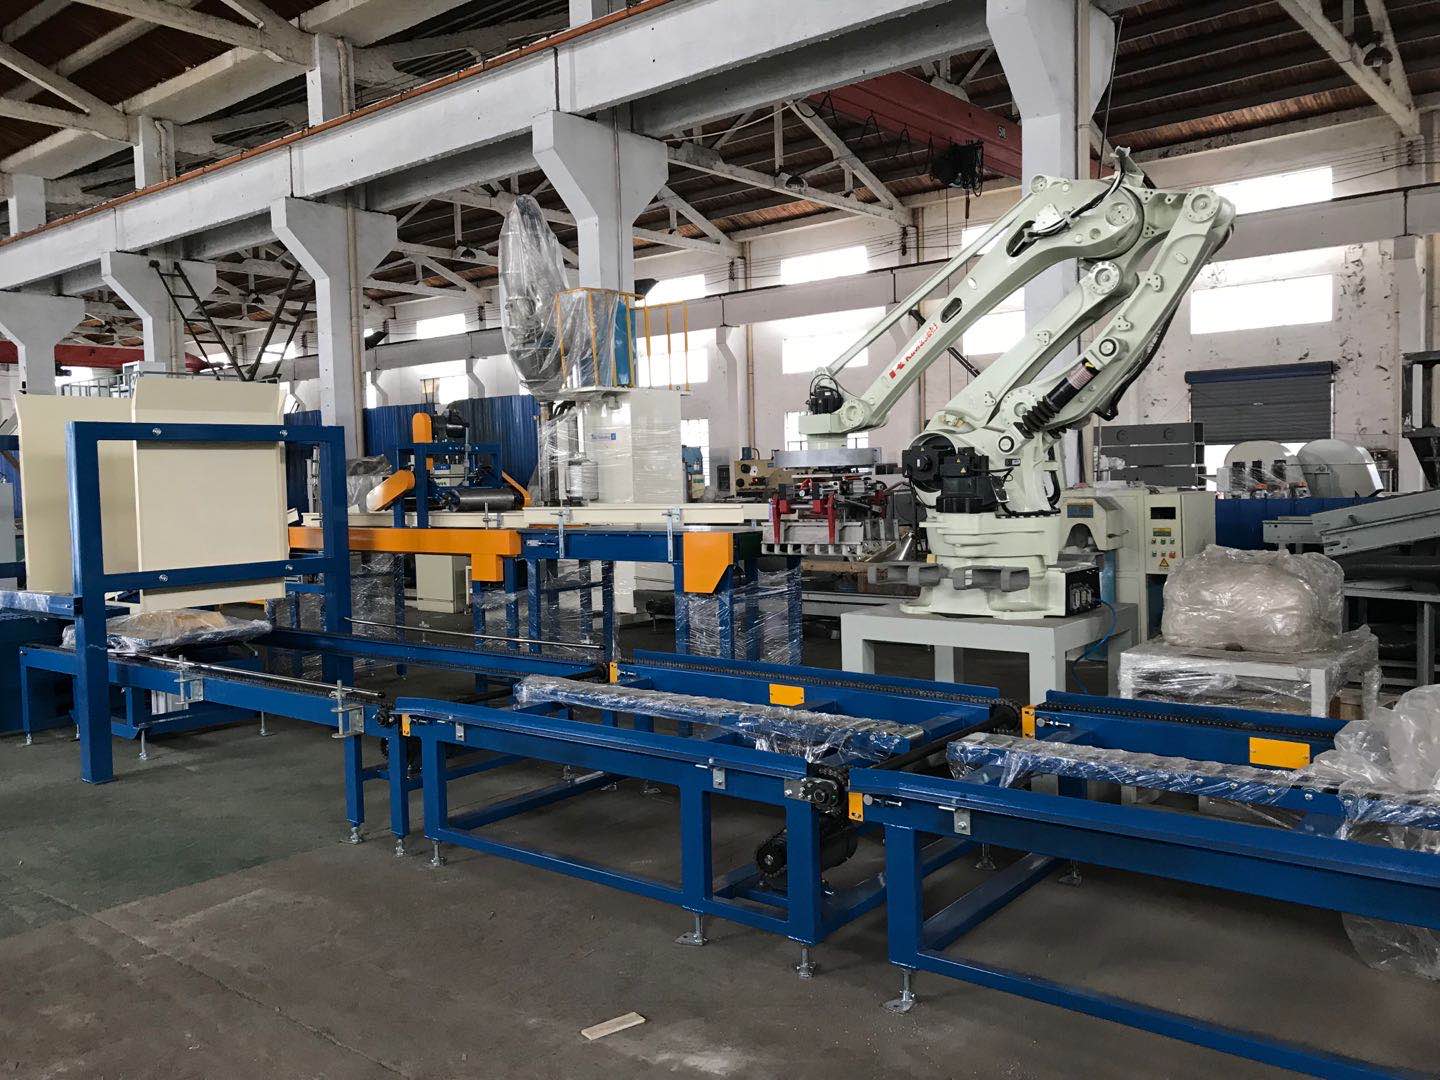 automatic packing machine Roofing Granules bagging machine fully Automatic Packing Palletizing Line, Fully Automatic Packing Line, Fully Automatic Bagging Line, Fully Automatic filling and packaging l